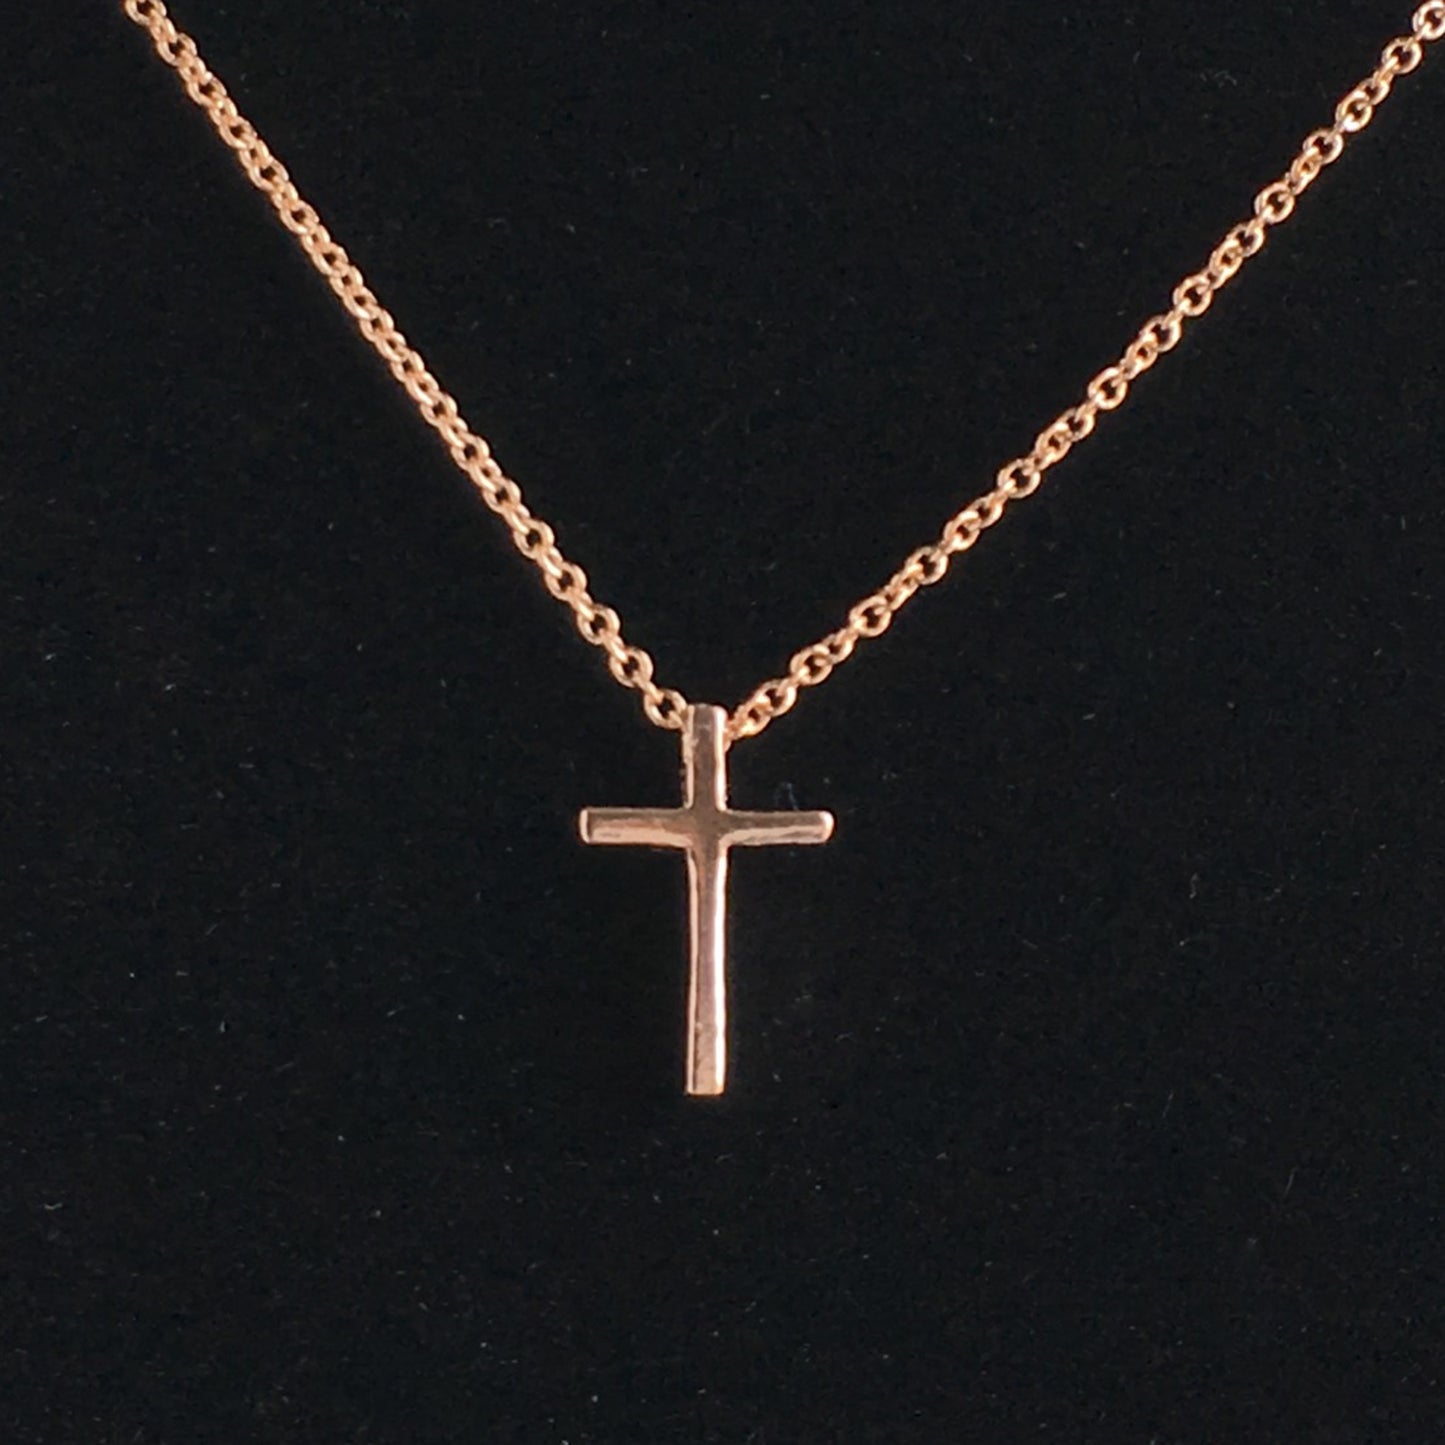 Gold Cross Necklaces For Women - Christian Gifts For Women - Christian  Jewelry For Women - Dainty Cross Necklace For Women - Cross Pendant -  Christian Necklace For Women - Catholic Gifts Women